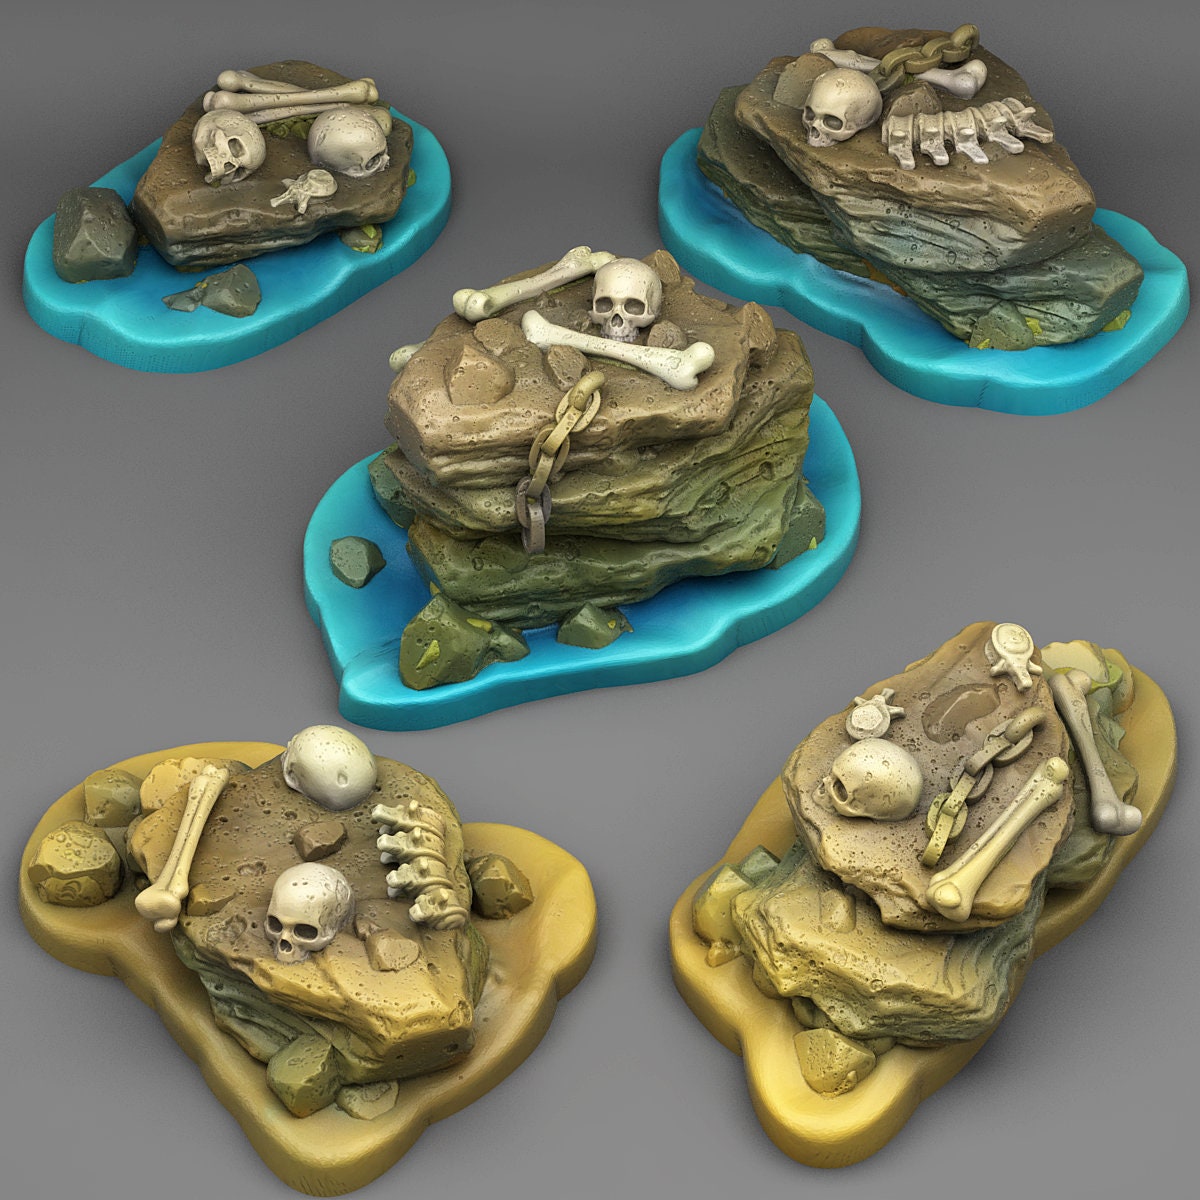 Pirate Stones Scatter Terrain - Fantastic Plants and Rocks